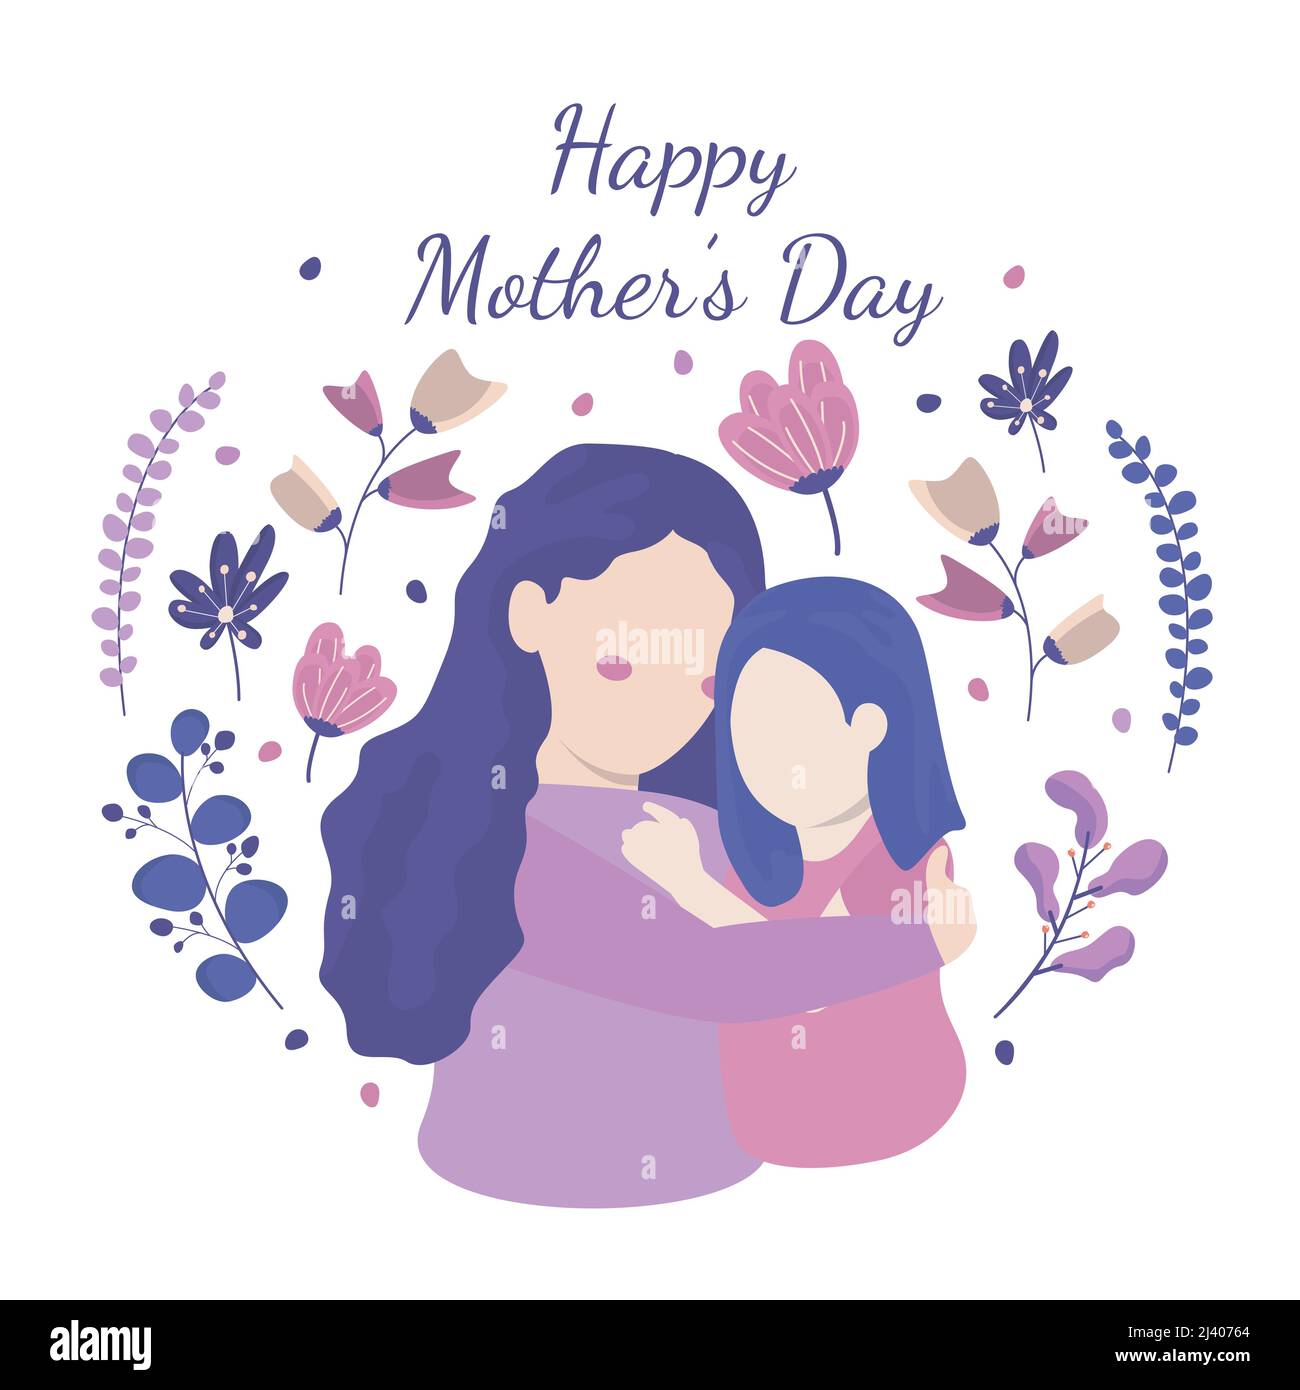 Happy Mother's Day Daughter Child Flower Floral Flat Illustration Stock Vector